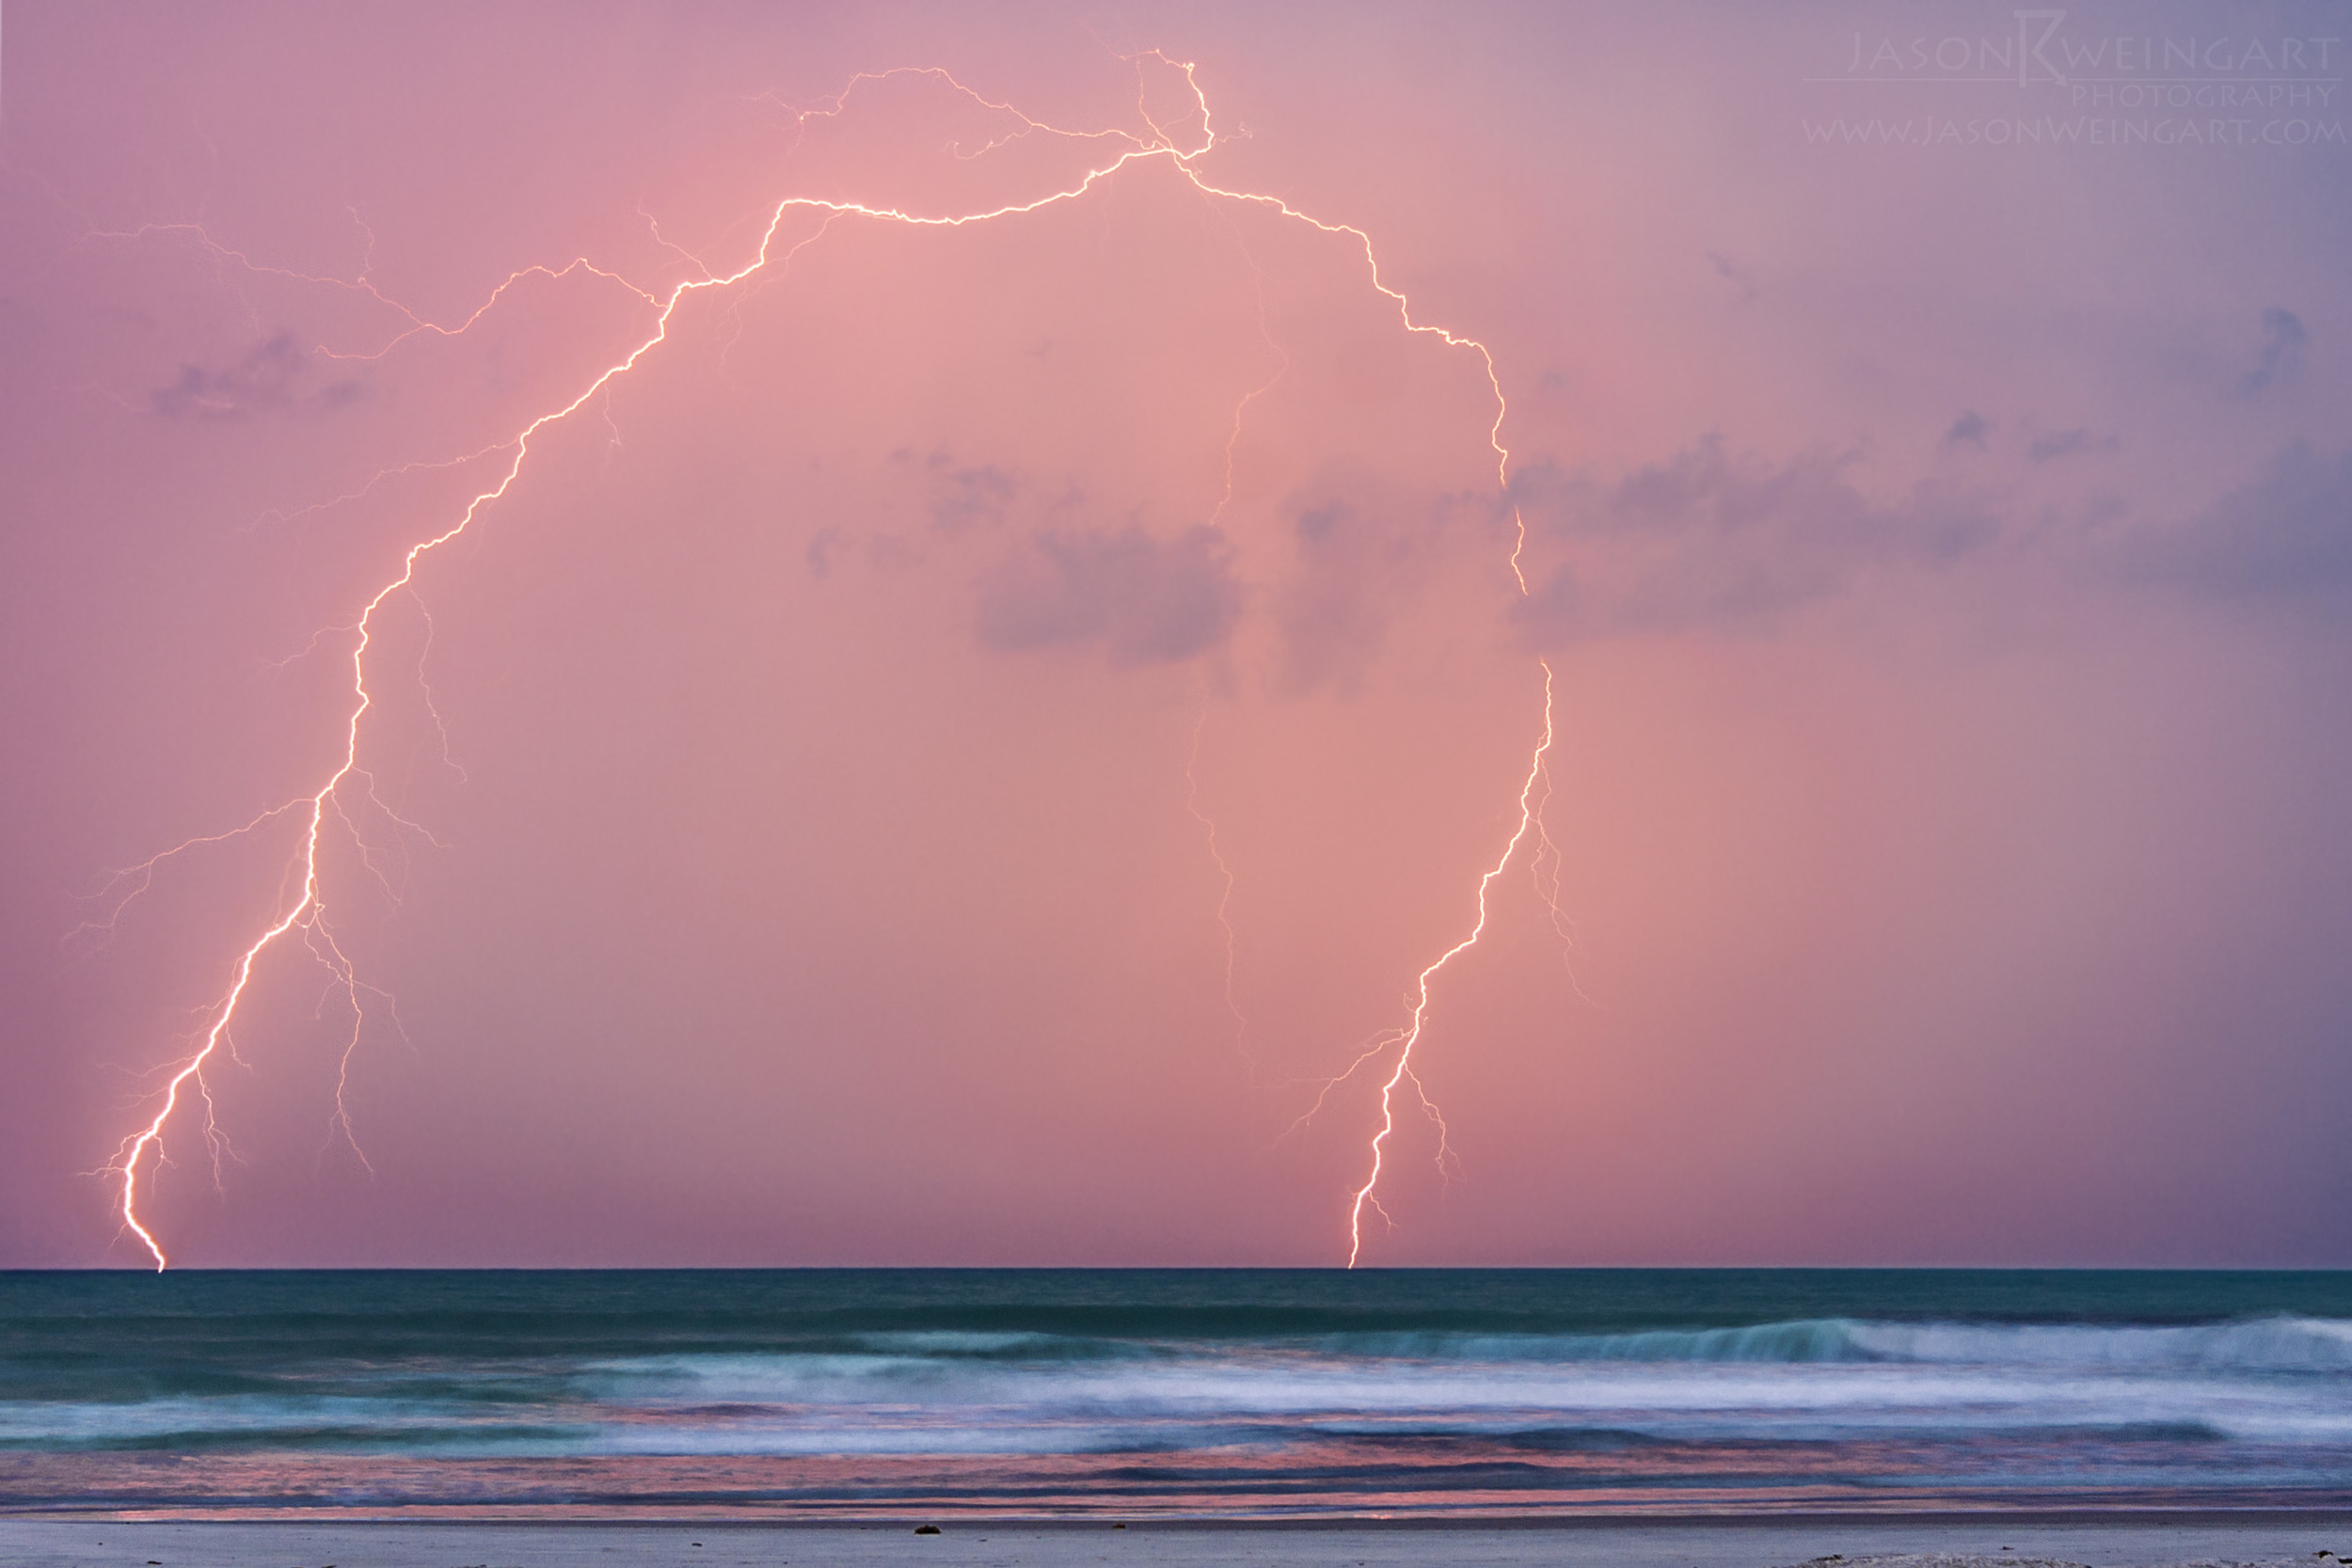  Lightning off the coast of New Smyrna Beach during sunset on may 13, 2011.&nbsp; 